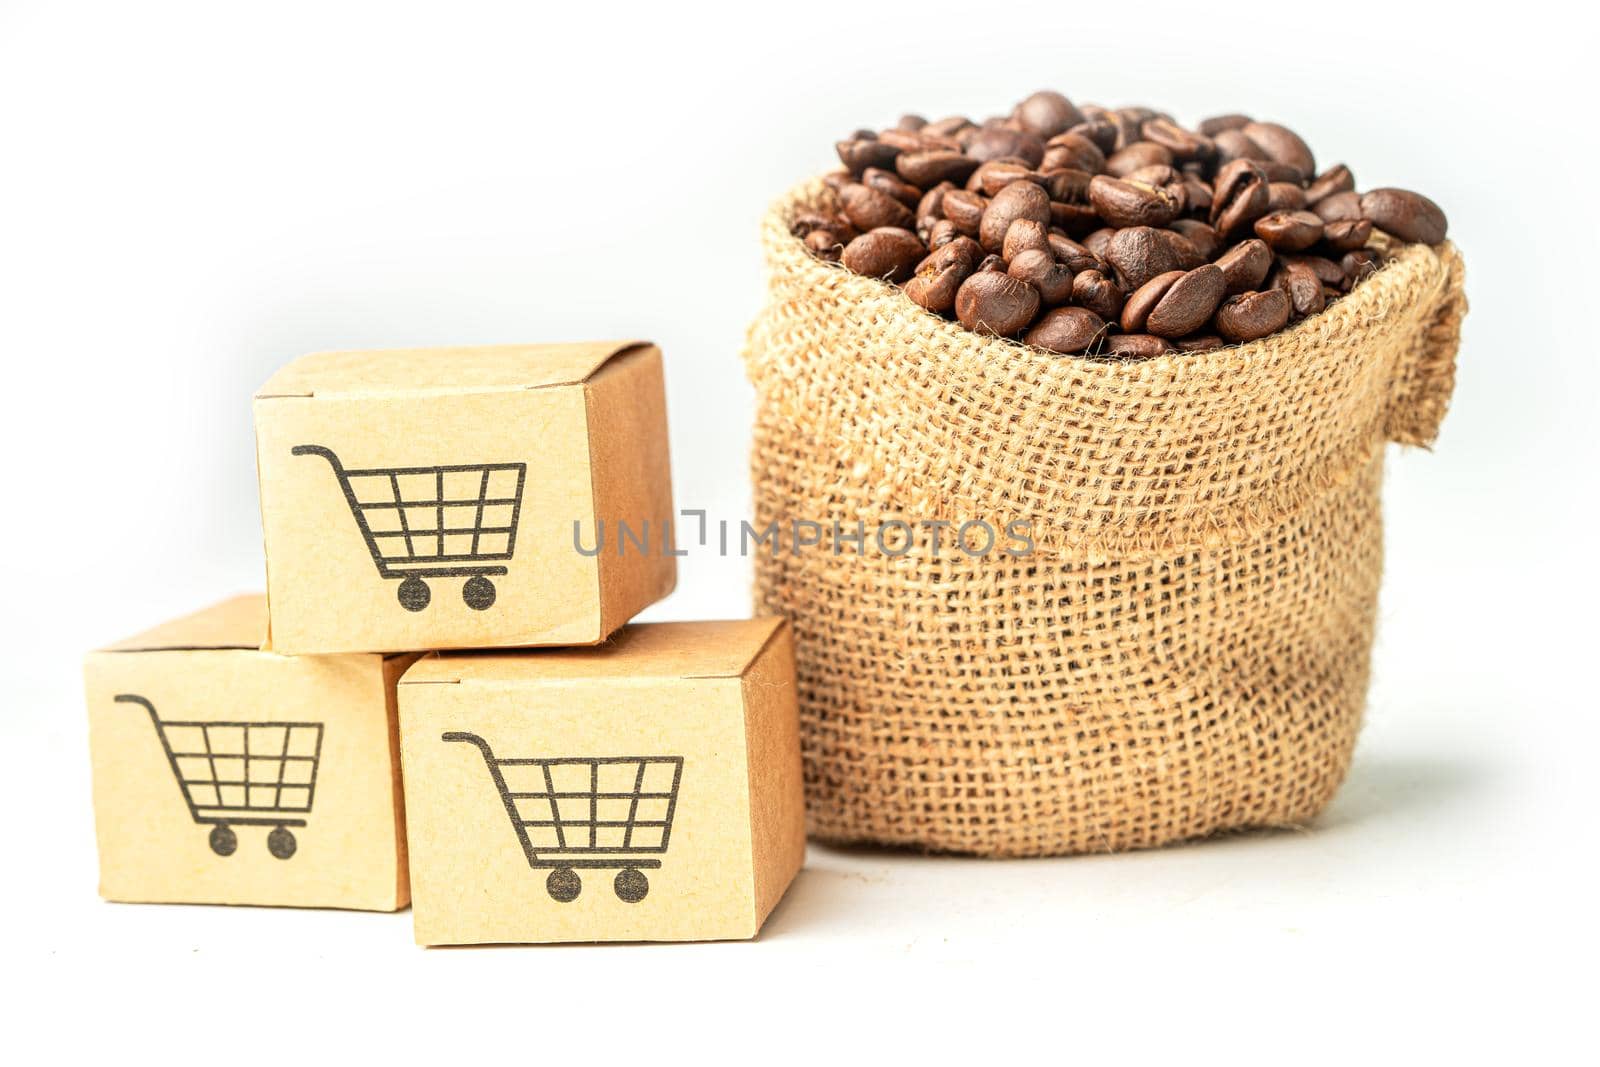 Box with shopping cart logo symbol on coffee beans, Import Export Shopping online or eCommerce delivery service store product shipping, trade, supplier concept. by pamai